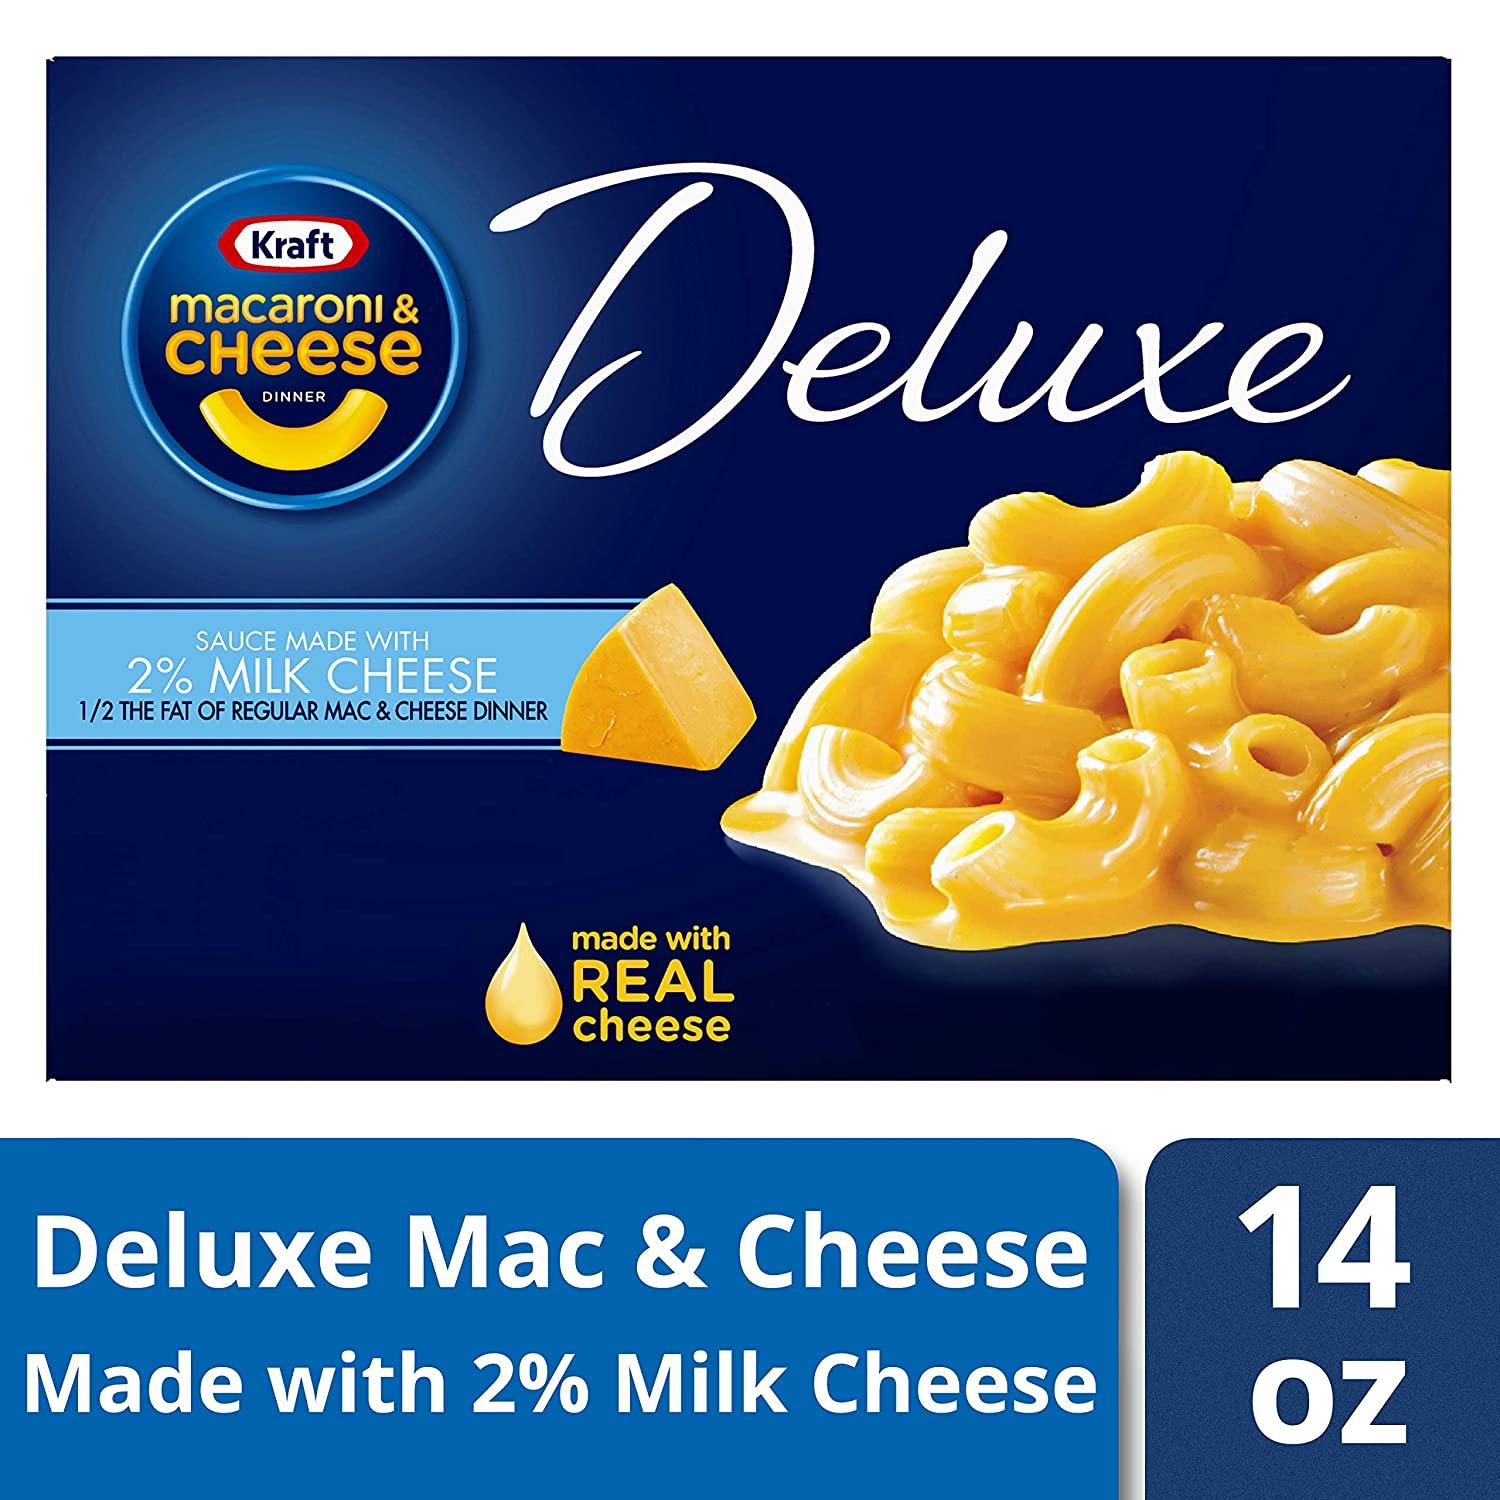 Kraft Macaroni & Cheese Deluxe Dinner, Original Cheddar, 14-Ounce Boxes  (Pack of 8)